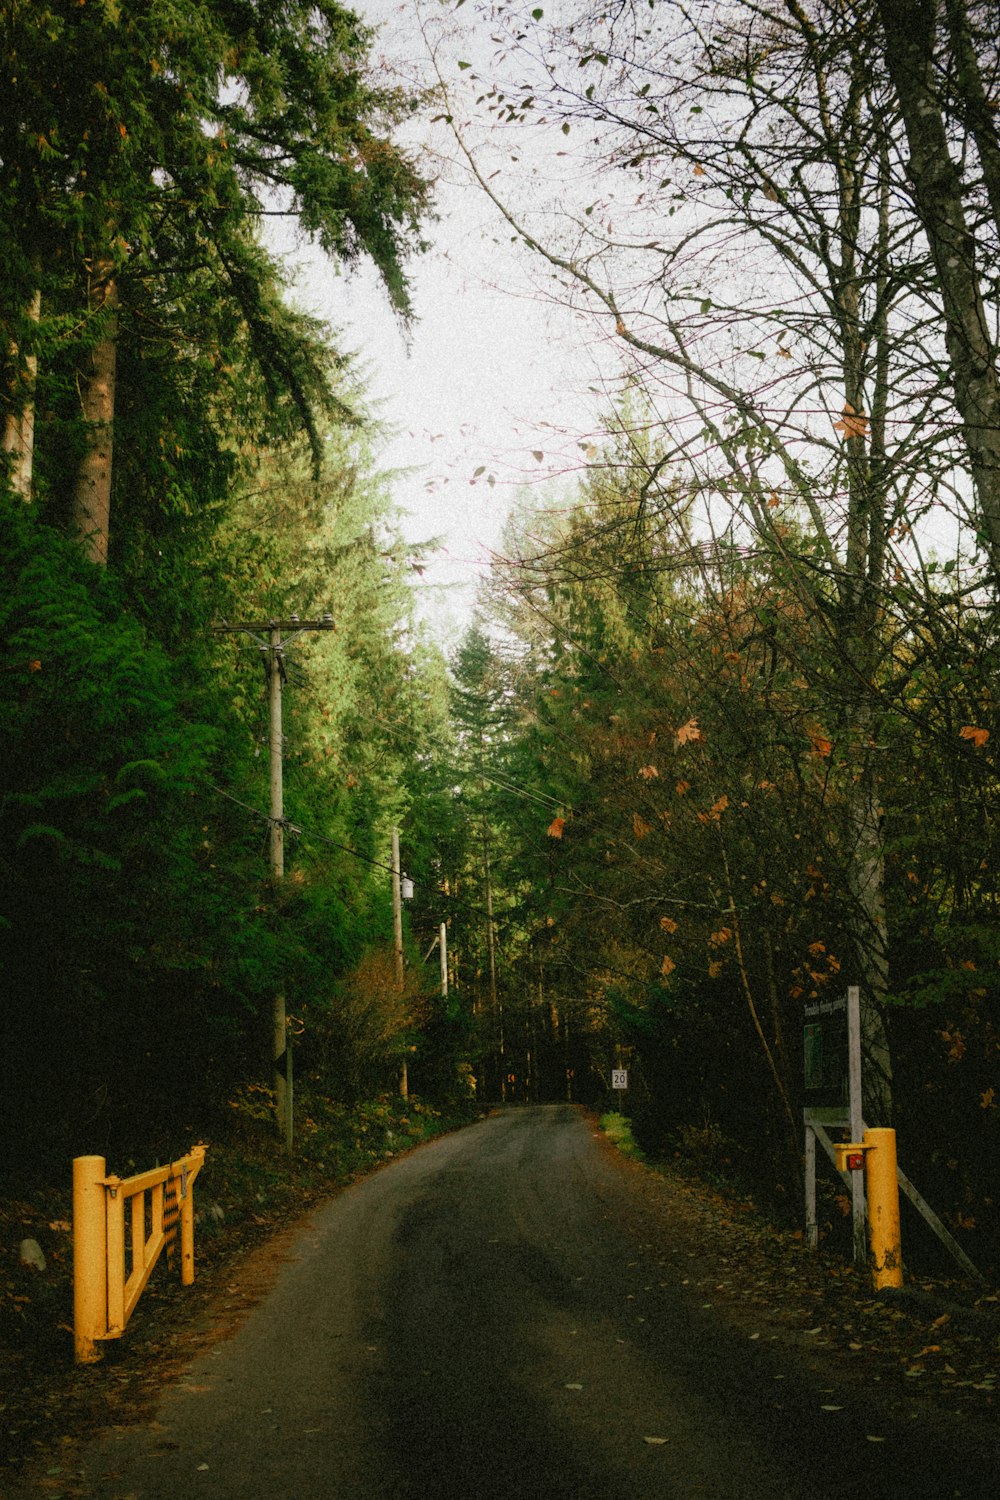 a road surrounded by trees and a yellow gate